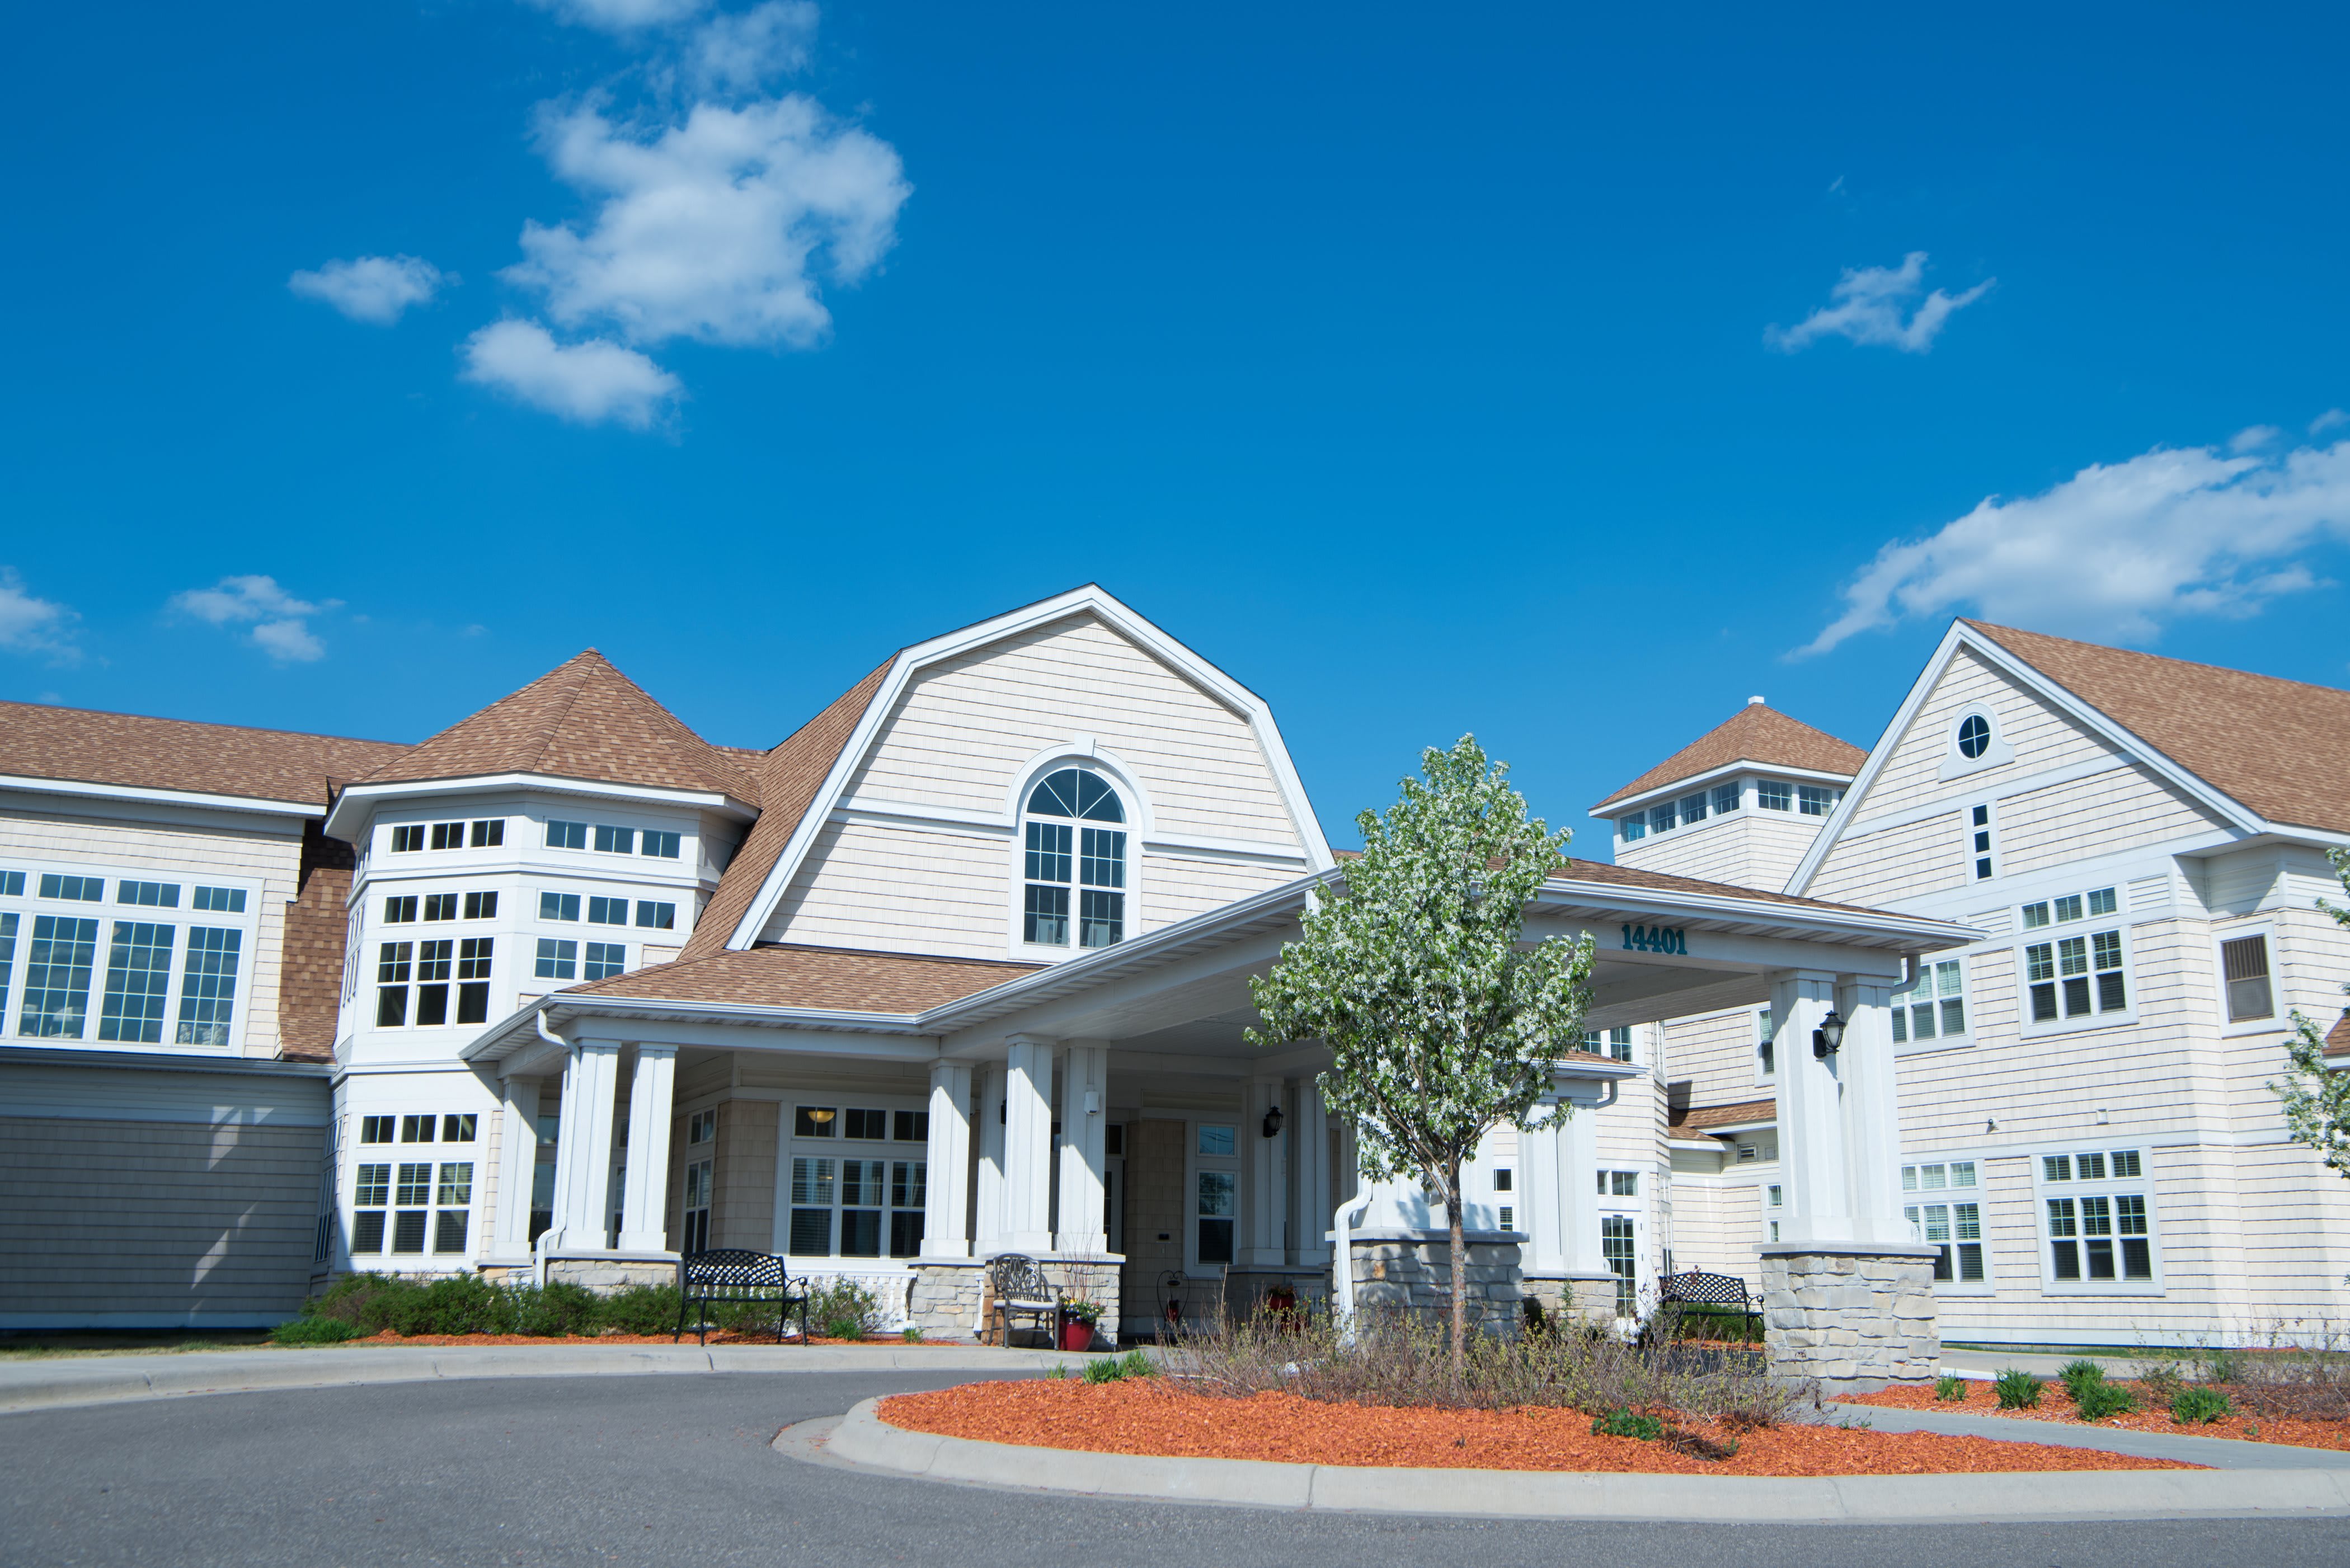 Stoney River Assisted Living and Memory Care community exterior